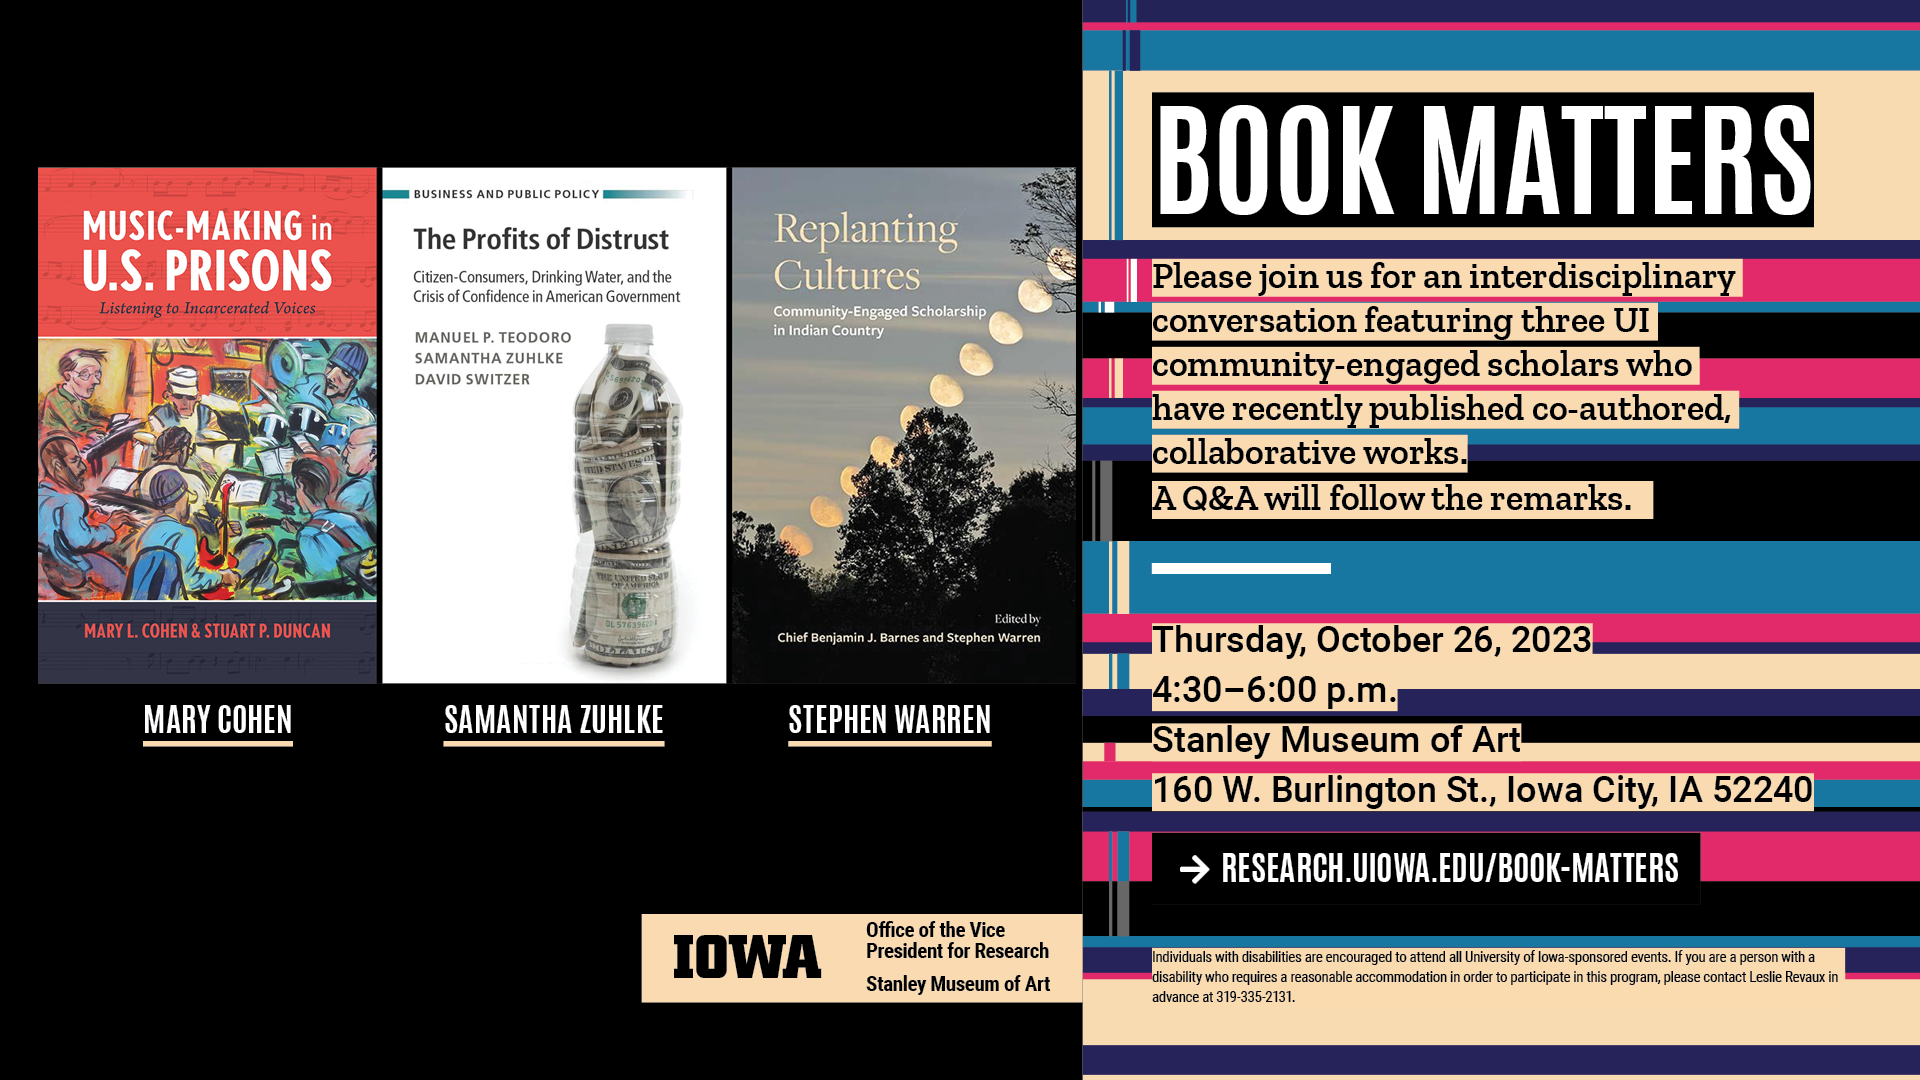 Flyer for book matters event Thursday, Oct 26 from 4:30-6pm at Stanley Art Museum